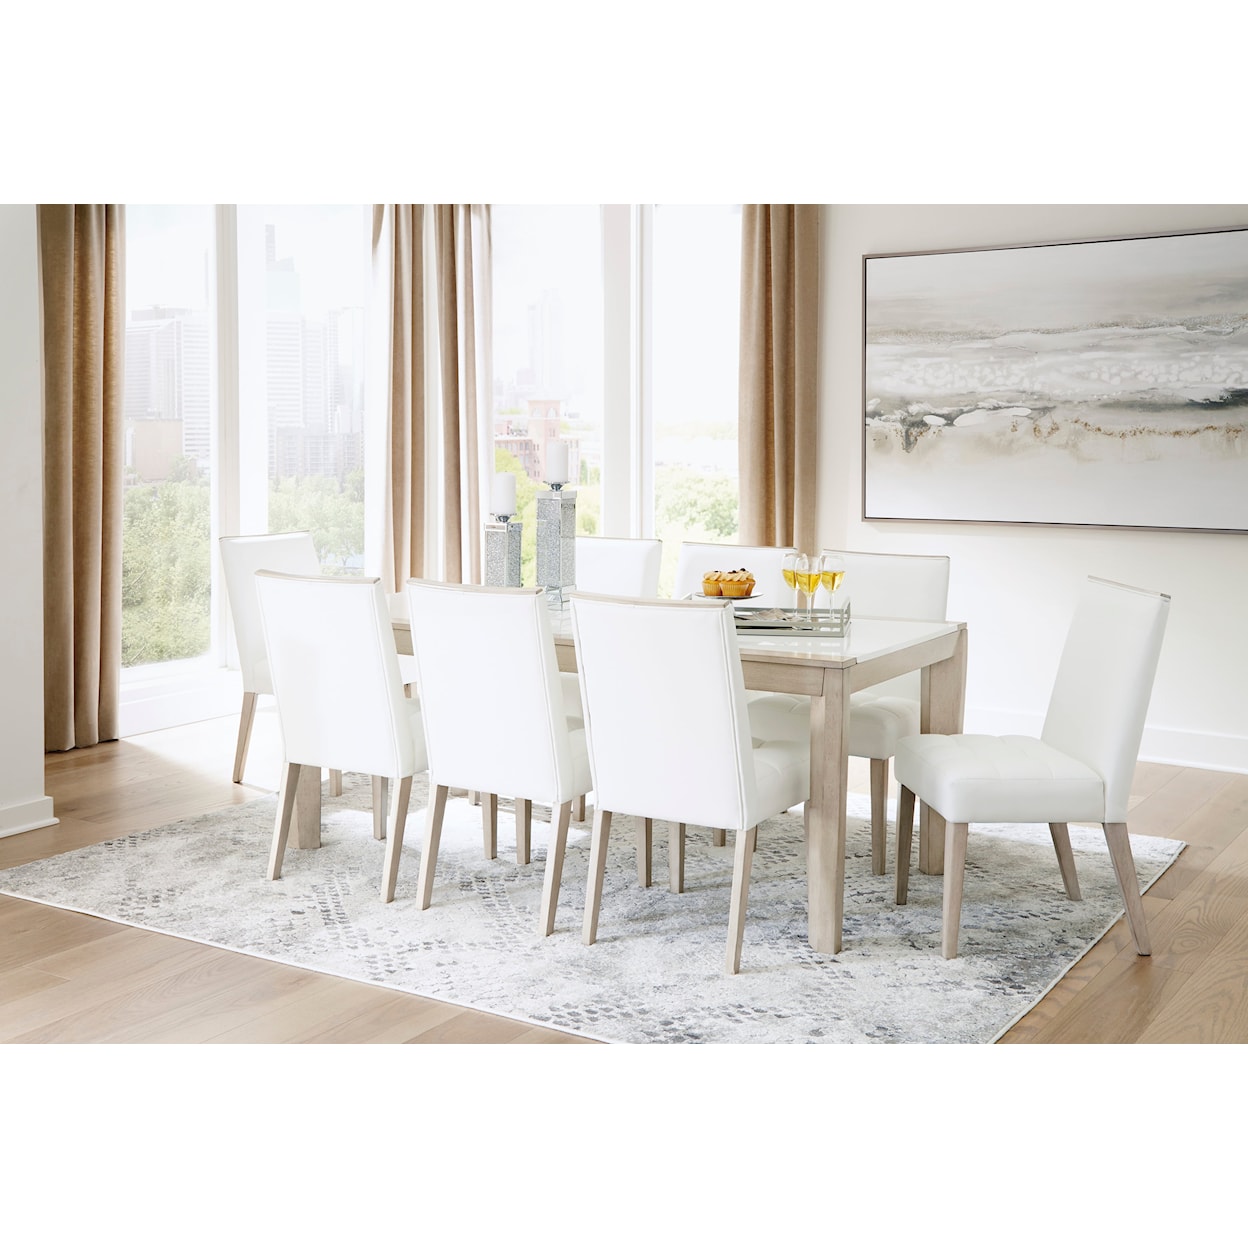 Benchcraft Wendora Table and 8 Chair Dining Set